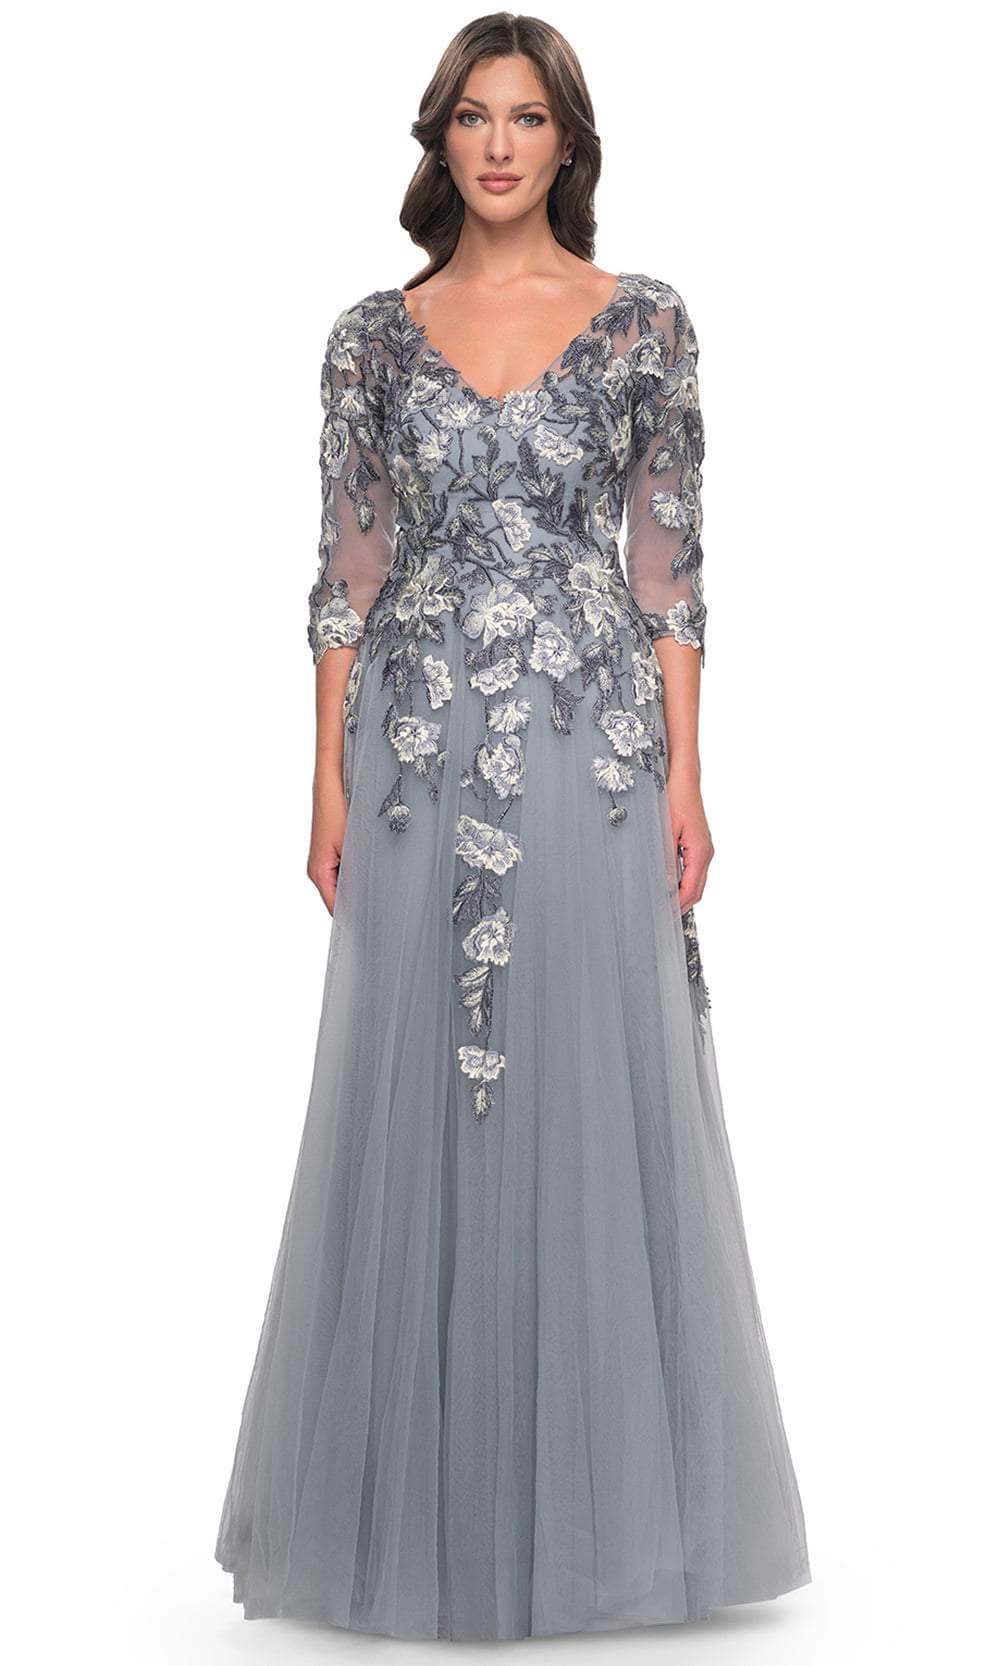 Image of La Femme 30968 - Quarter Sleeve Embroidered Long Gown